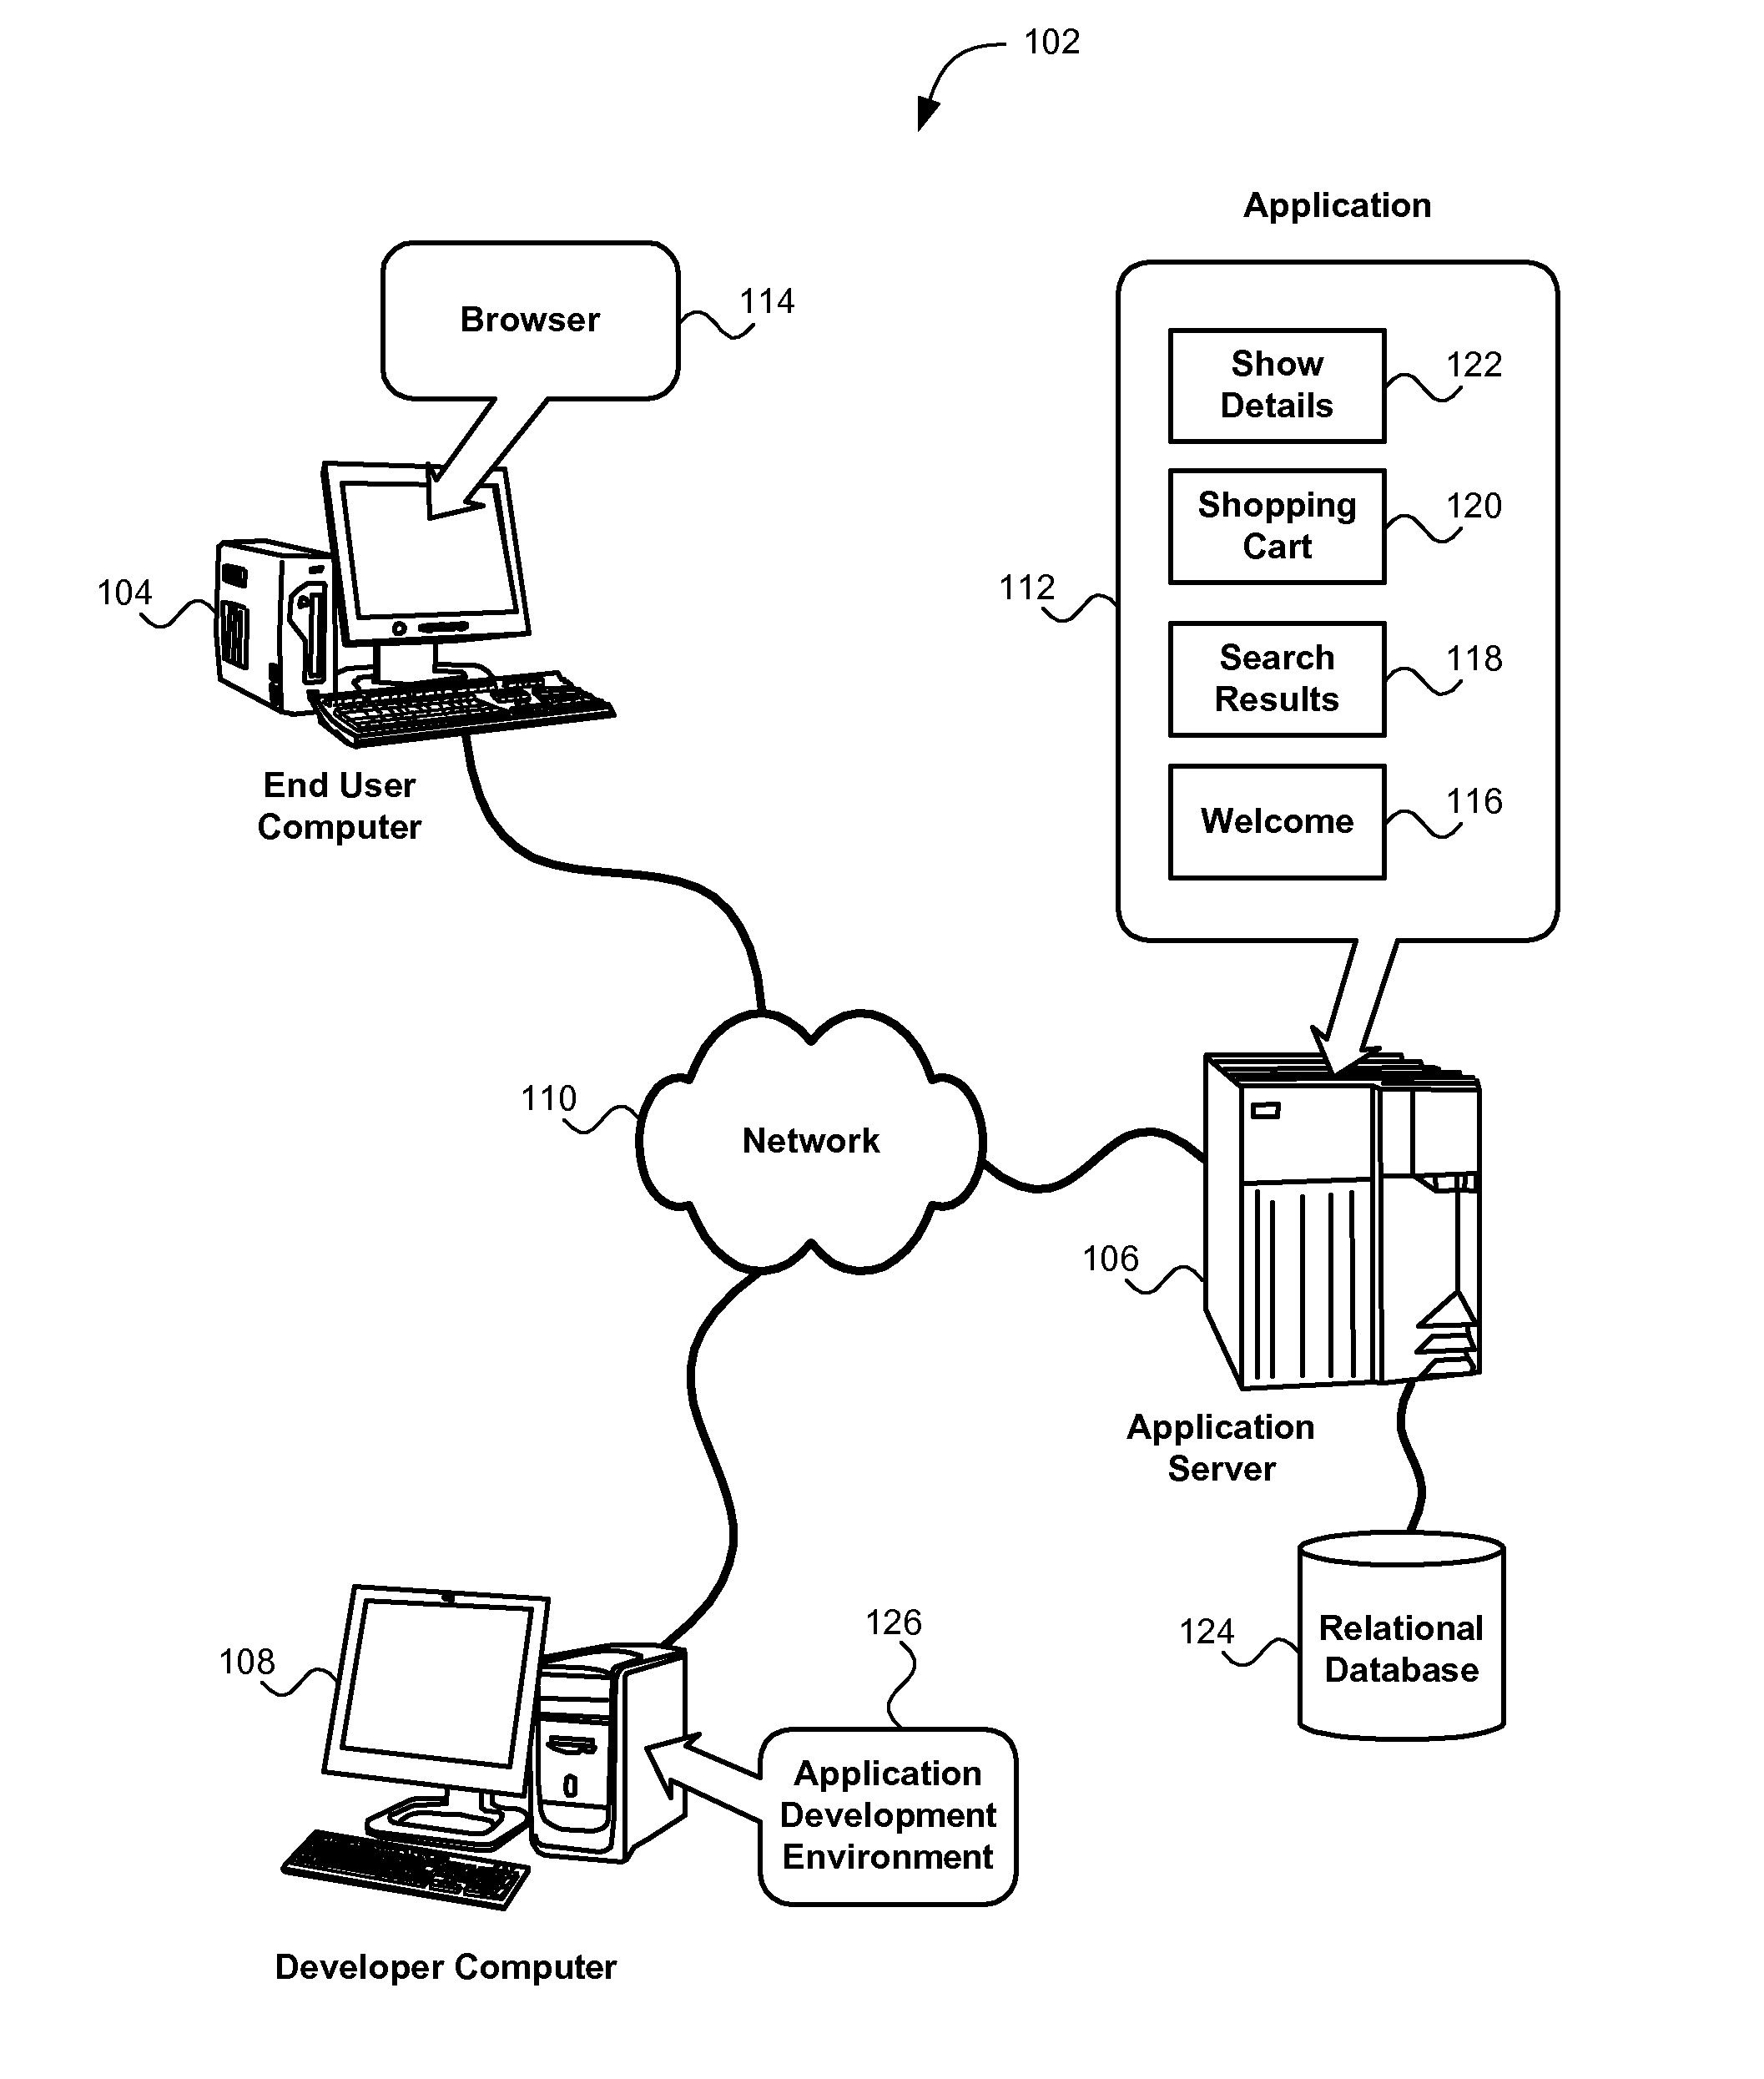 Enabling multi-view applications based on a relational state machine paradigm